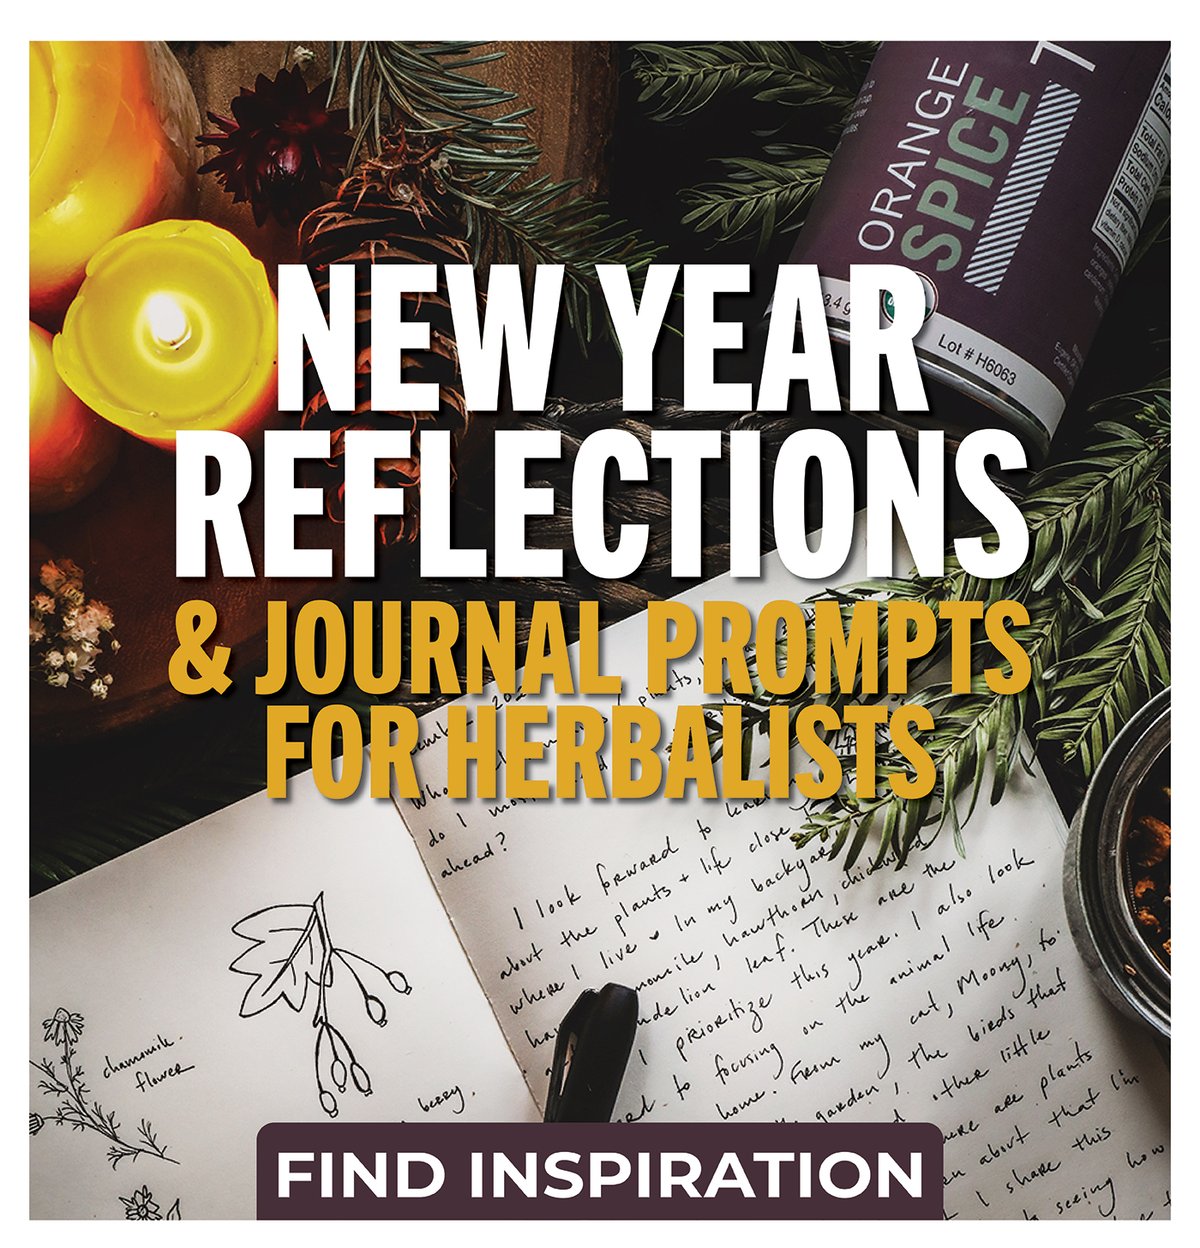 New Year Reflections & Journal Prompts